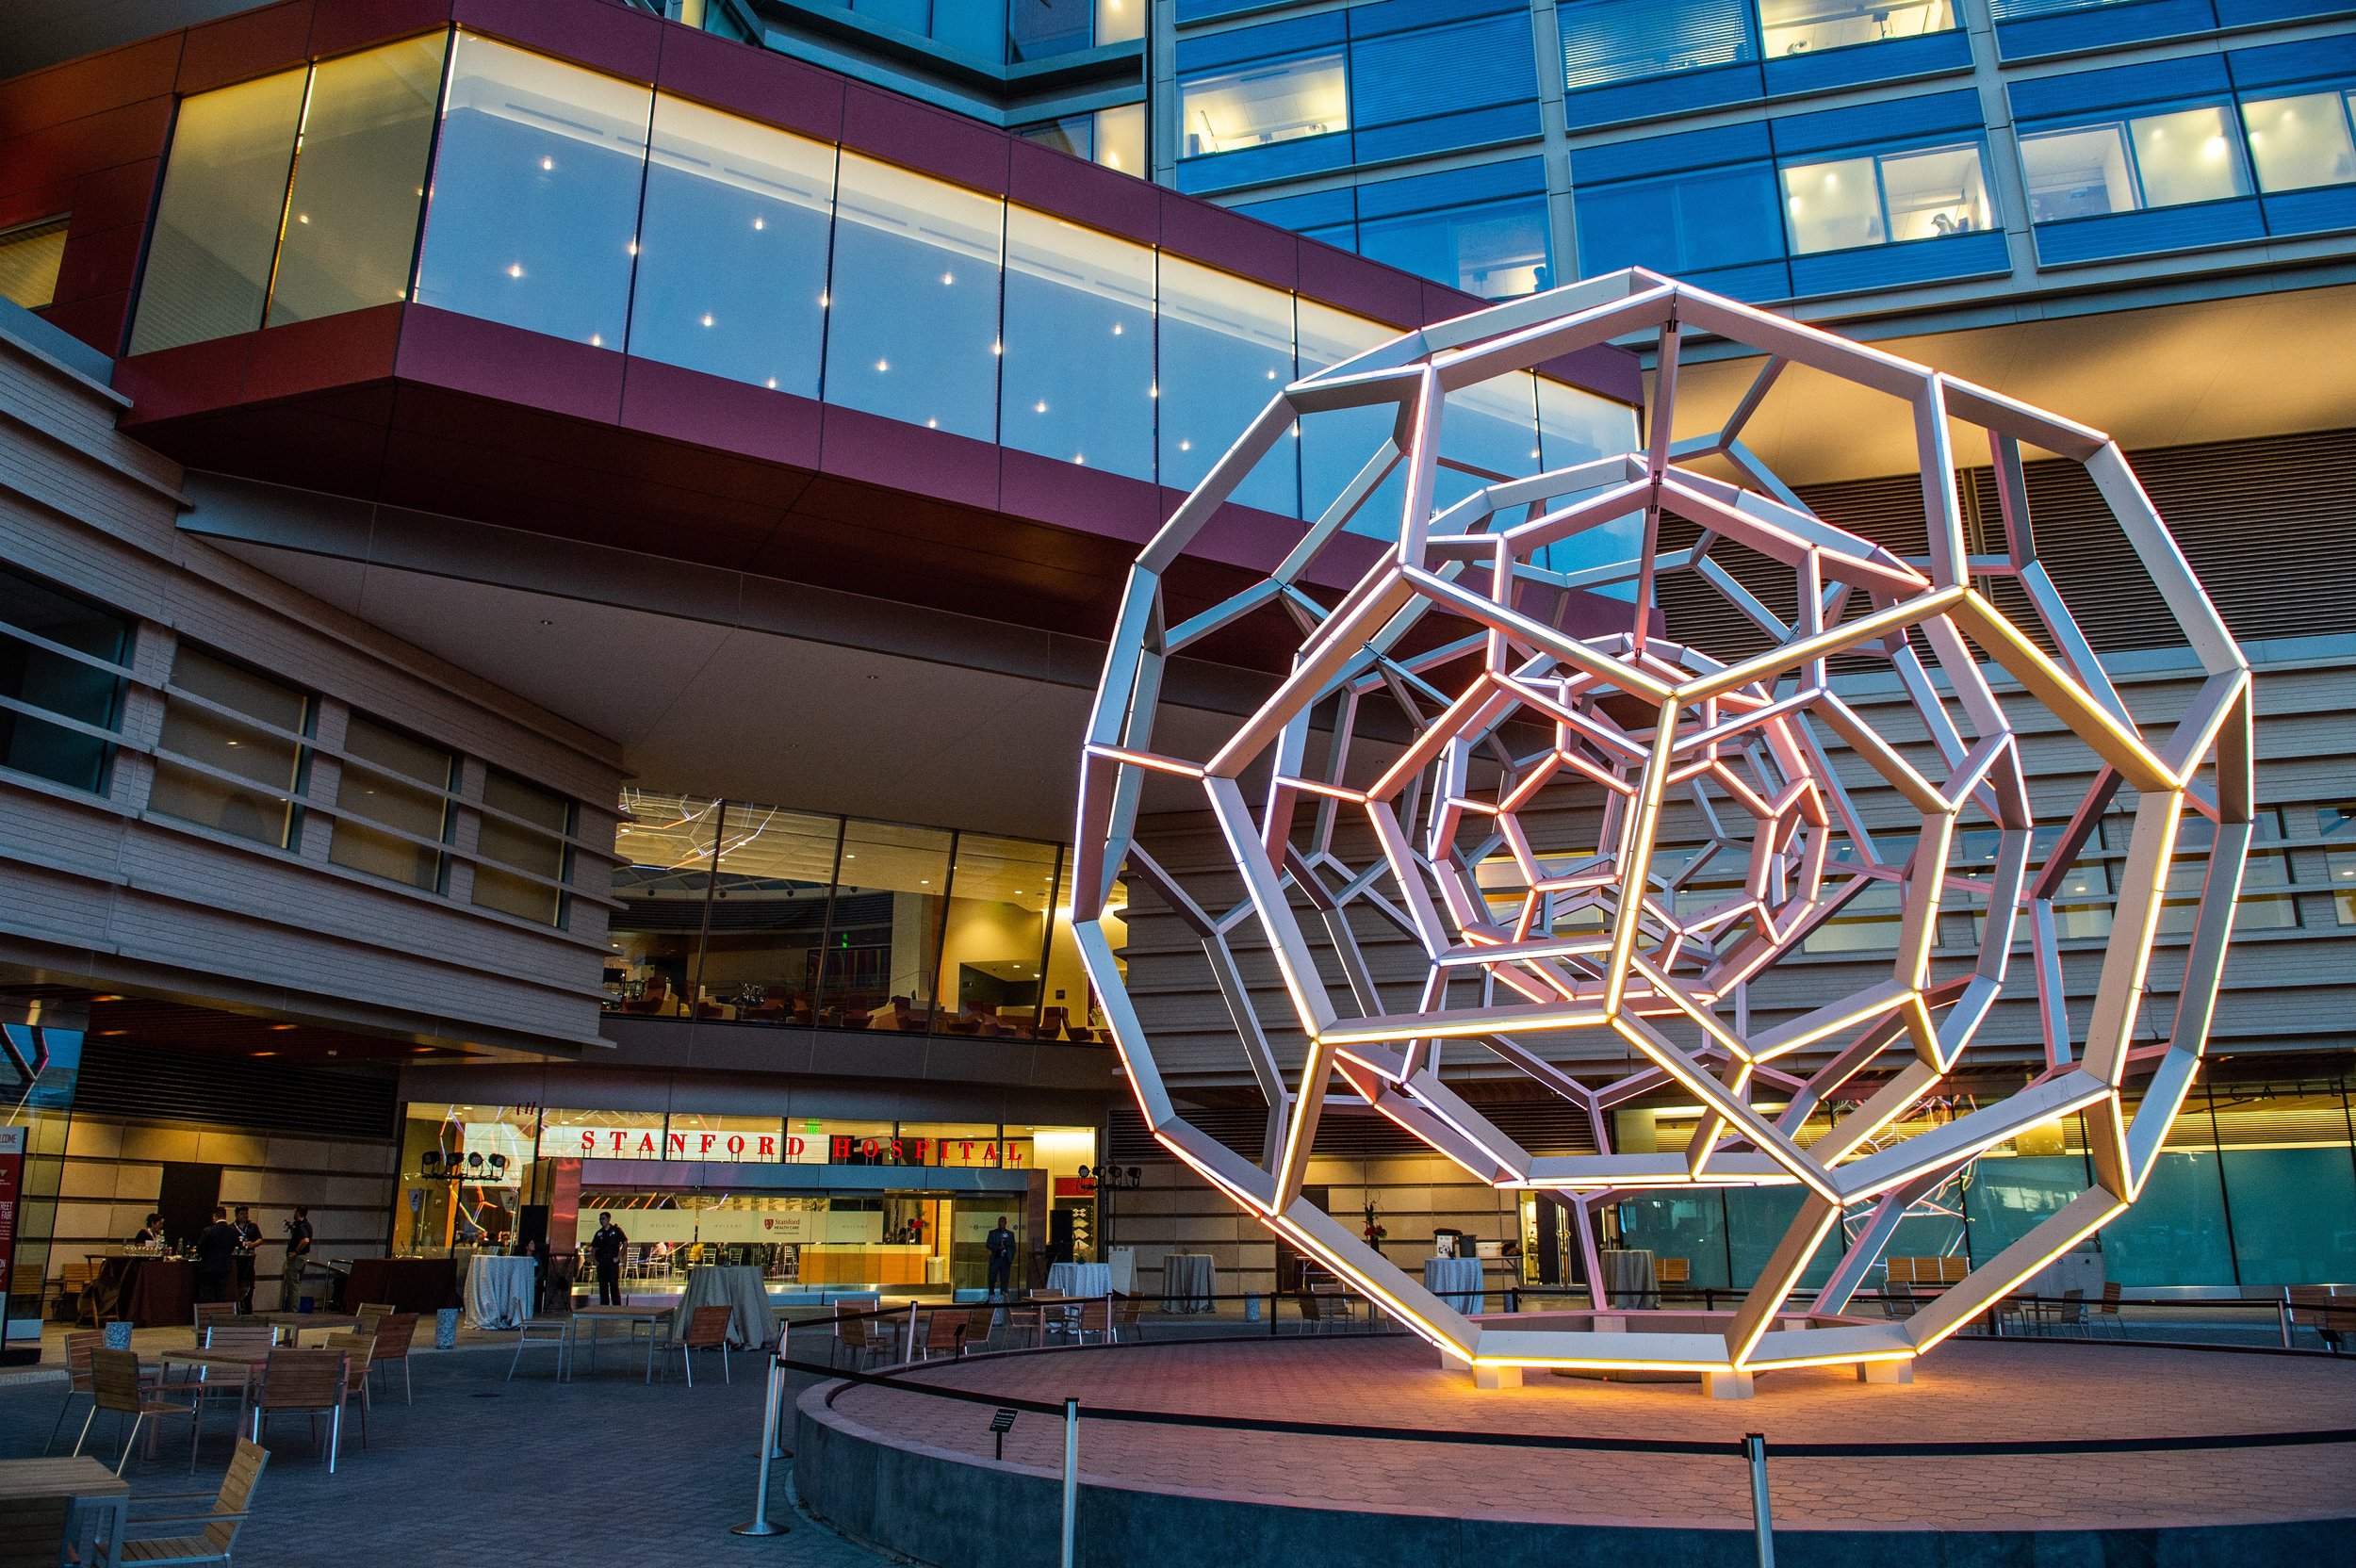 Buckyball (Stanford), 2019 - Stanford Hospital, Stanford, CA